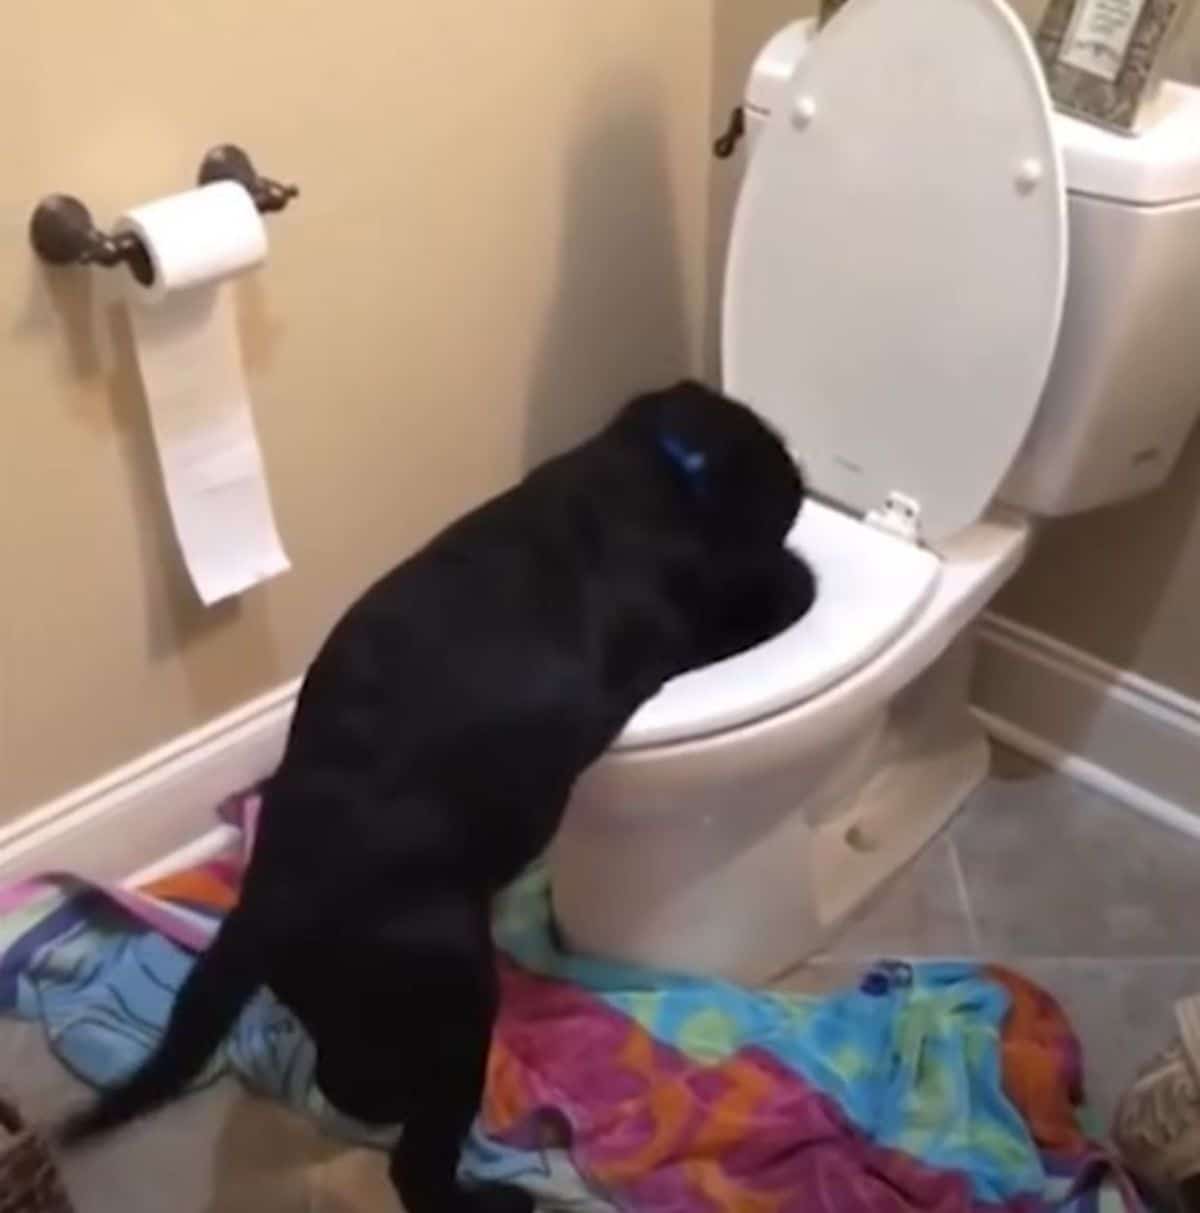 black puppy sloshing around the water in a toilet